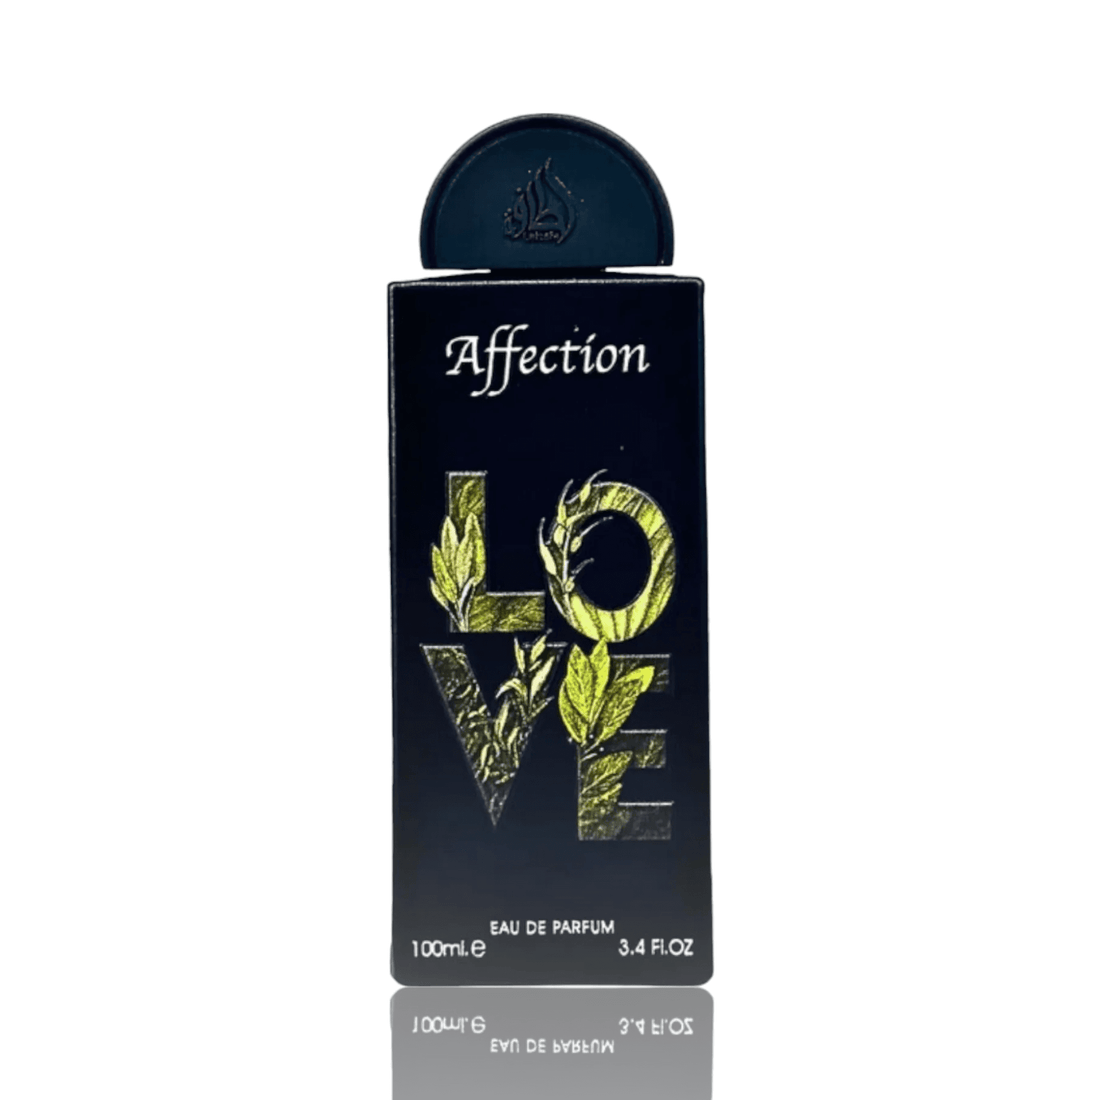 Elegant 100ml bottle of Affection Perfume by Lattafa Pride, showcasing its blend of nutty and floral notes.